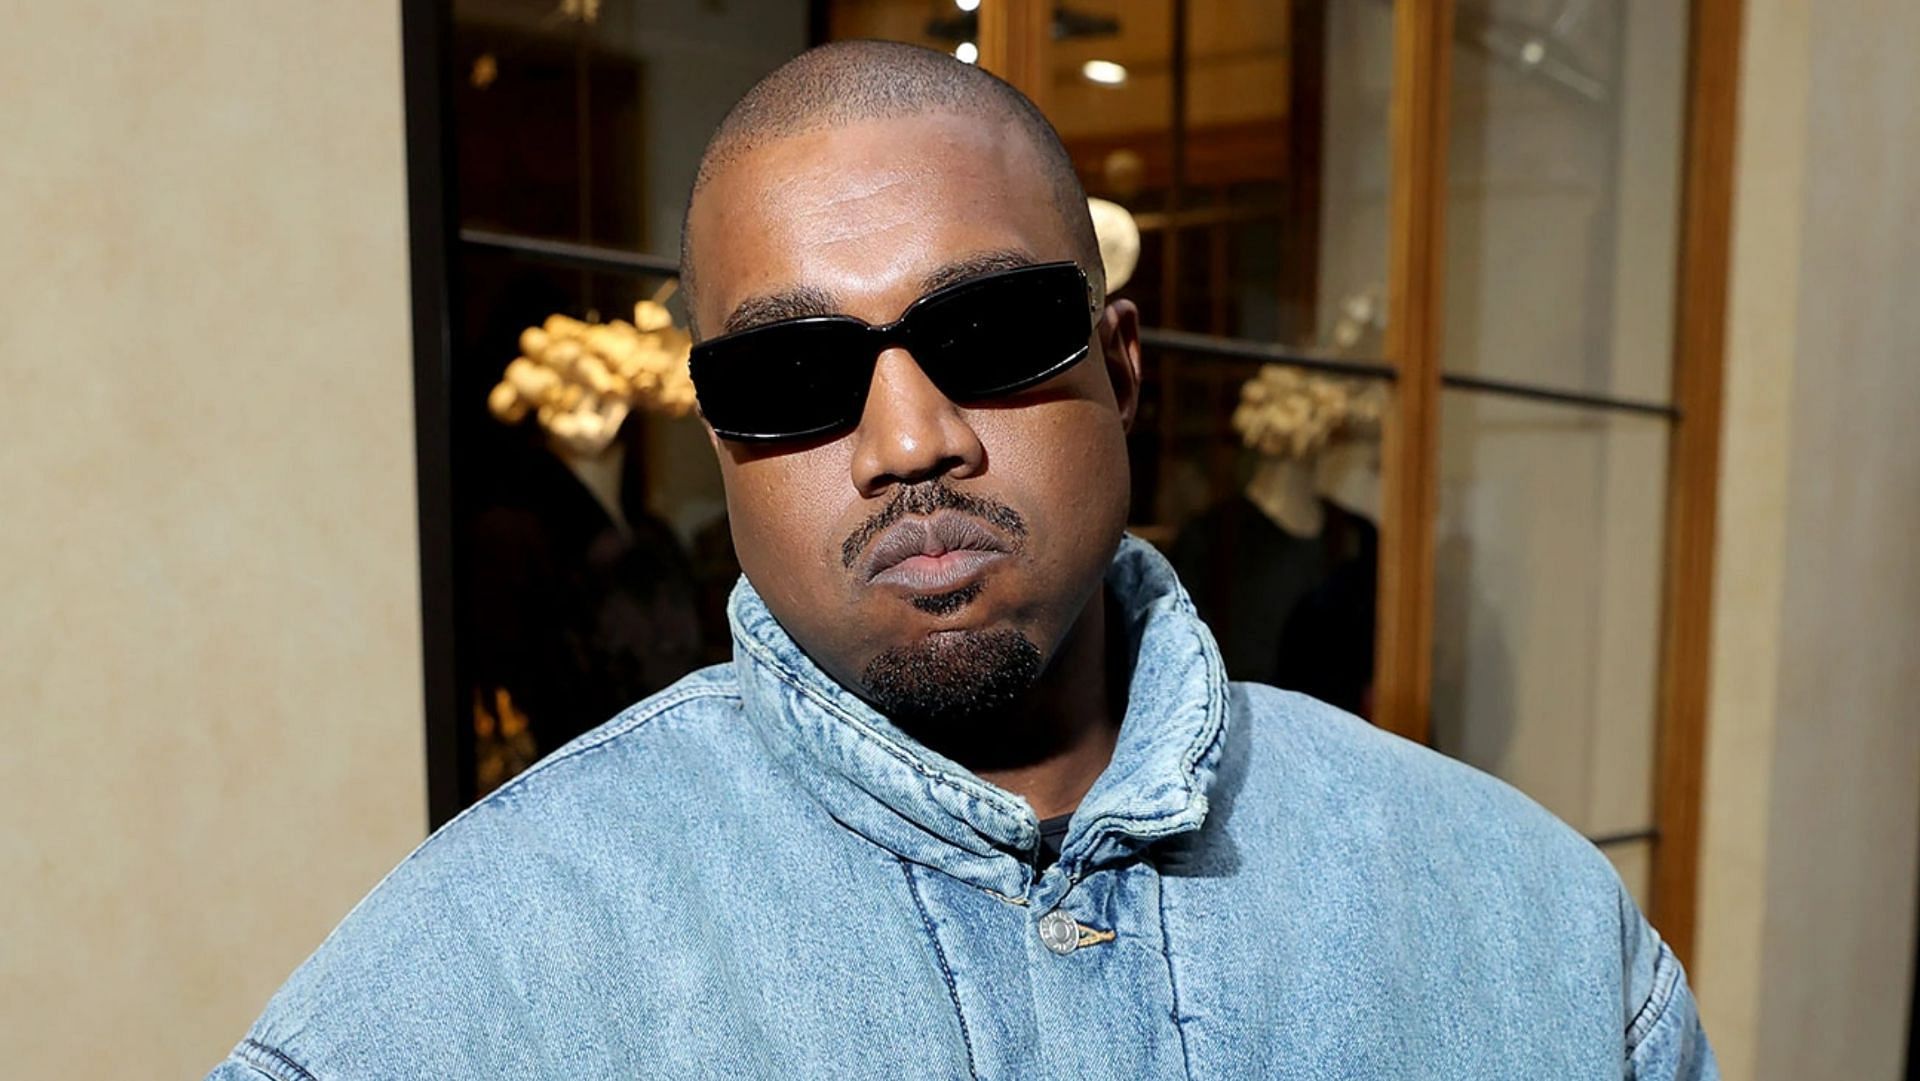 Kanye West is followed by Mohammad Hadid and Jon Minadeo II for the infamous titles. (Image via Victor Boyko/Getty)